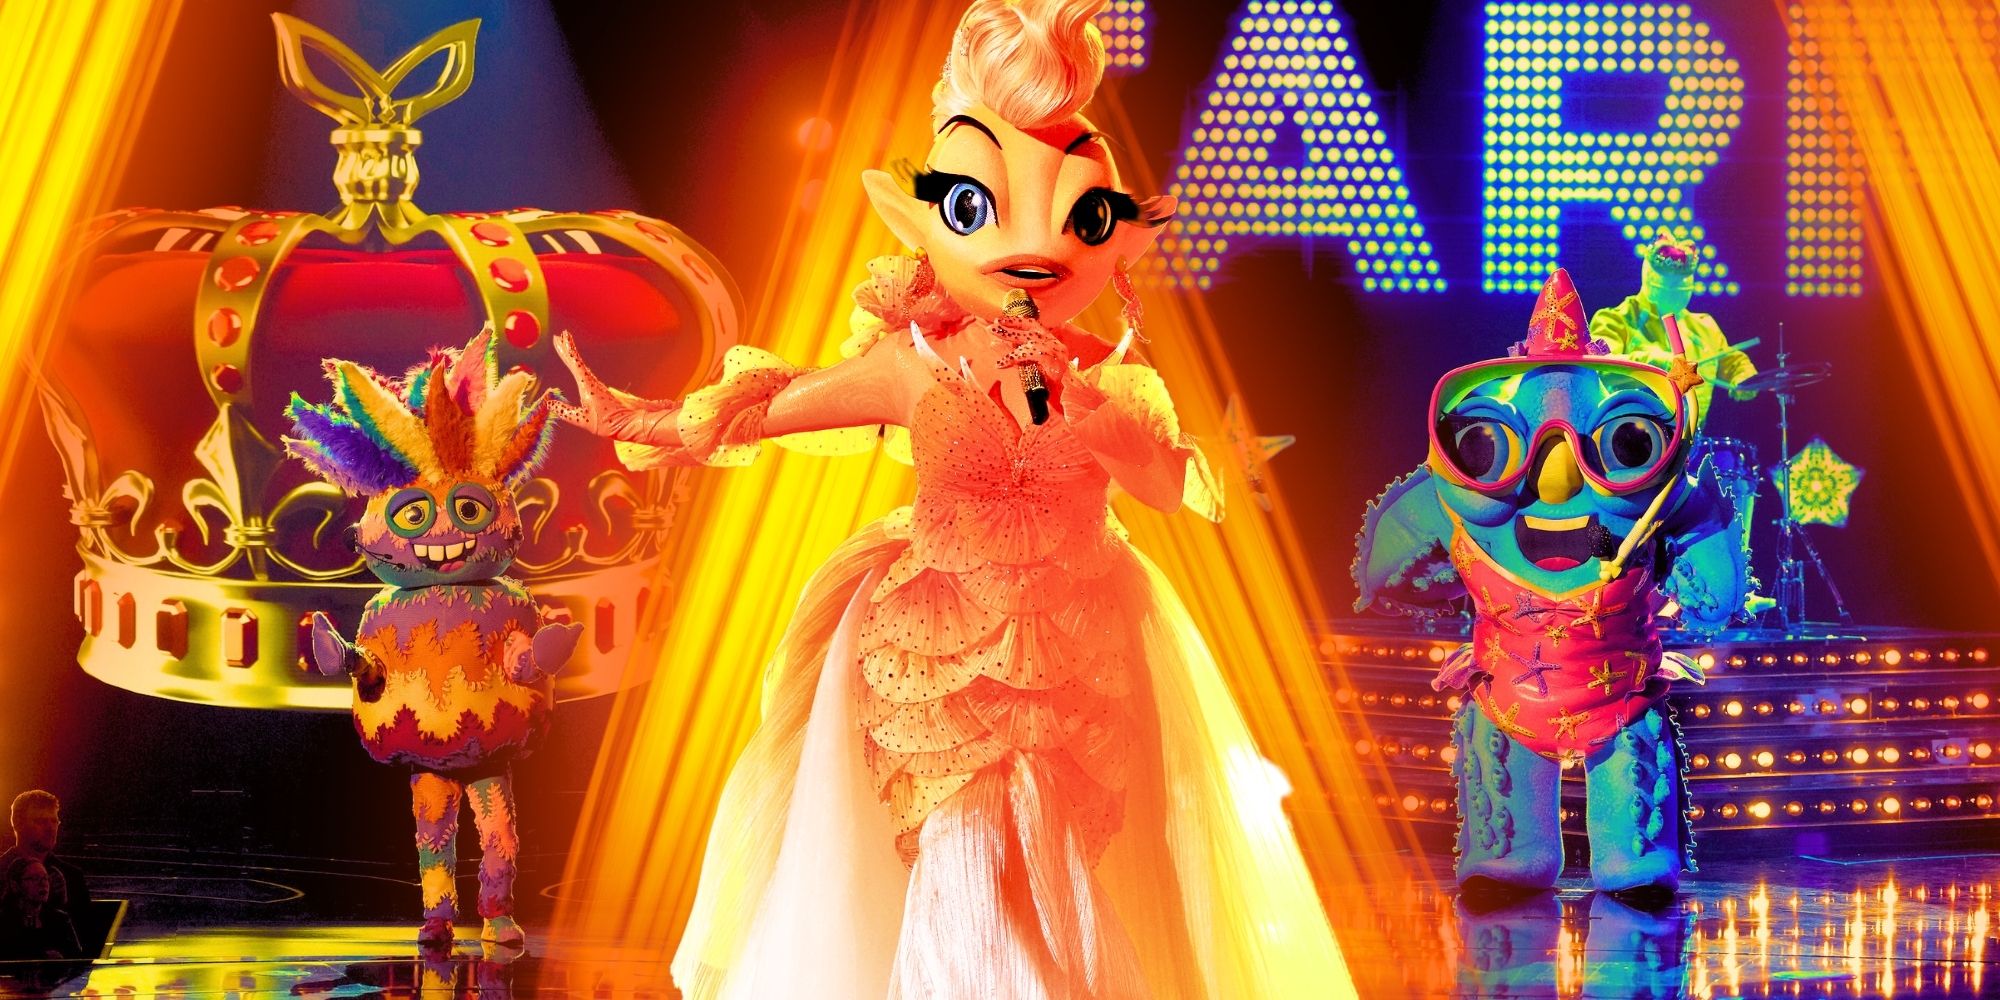 The Masked Singer's Goldfish and Starfish performing on stage